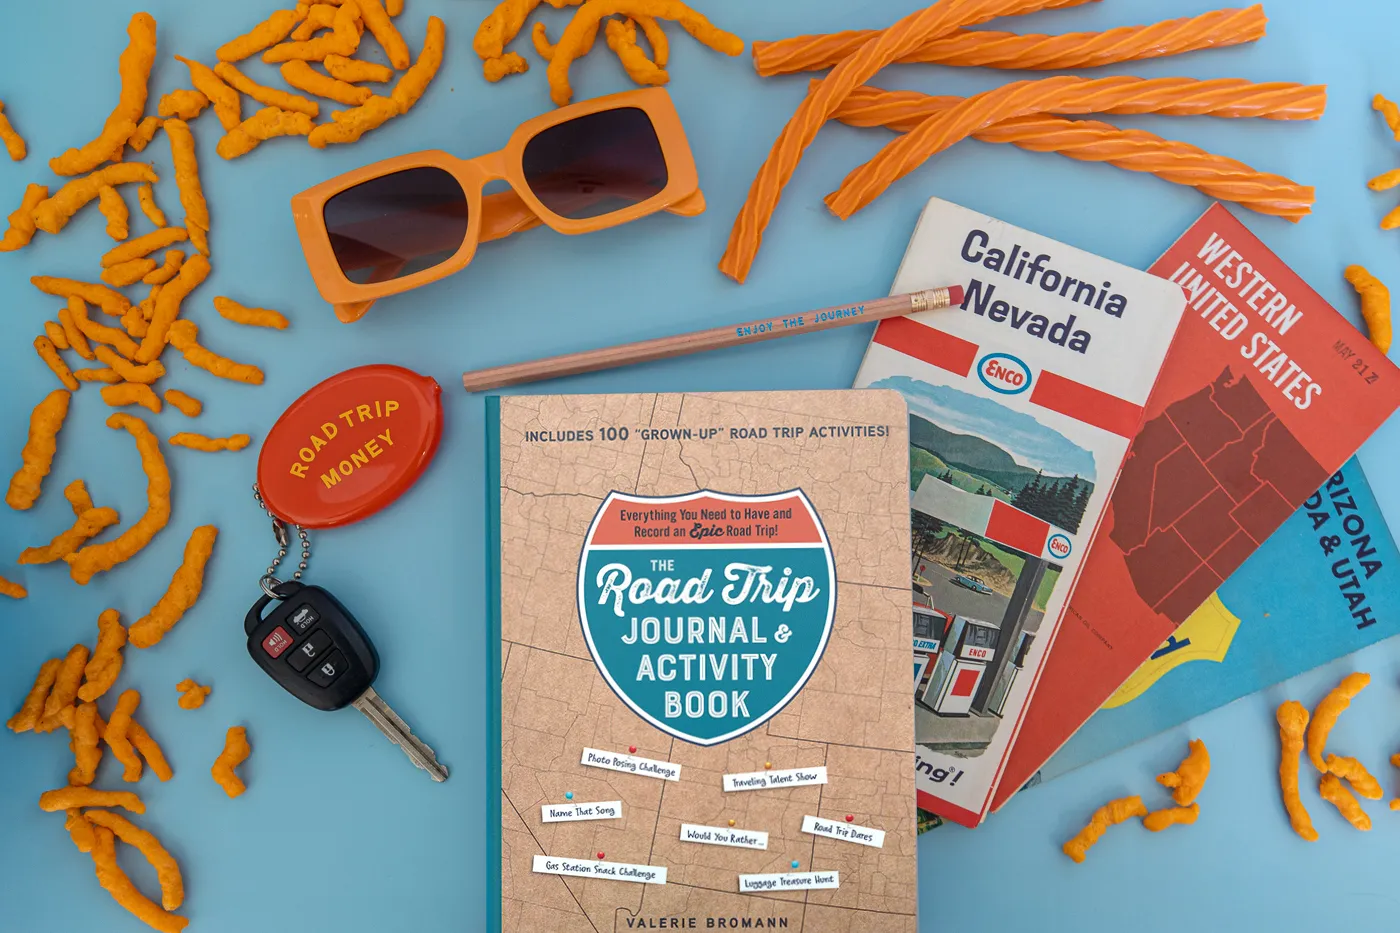 The Road Trip Journal & Activity Book Everything You Need to Have and Record an Epic Road Trip! by Valerie Bromann